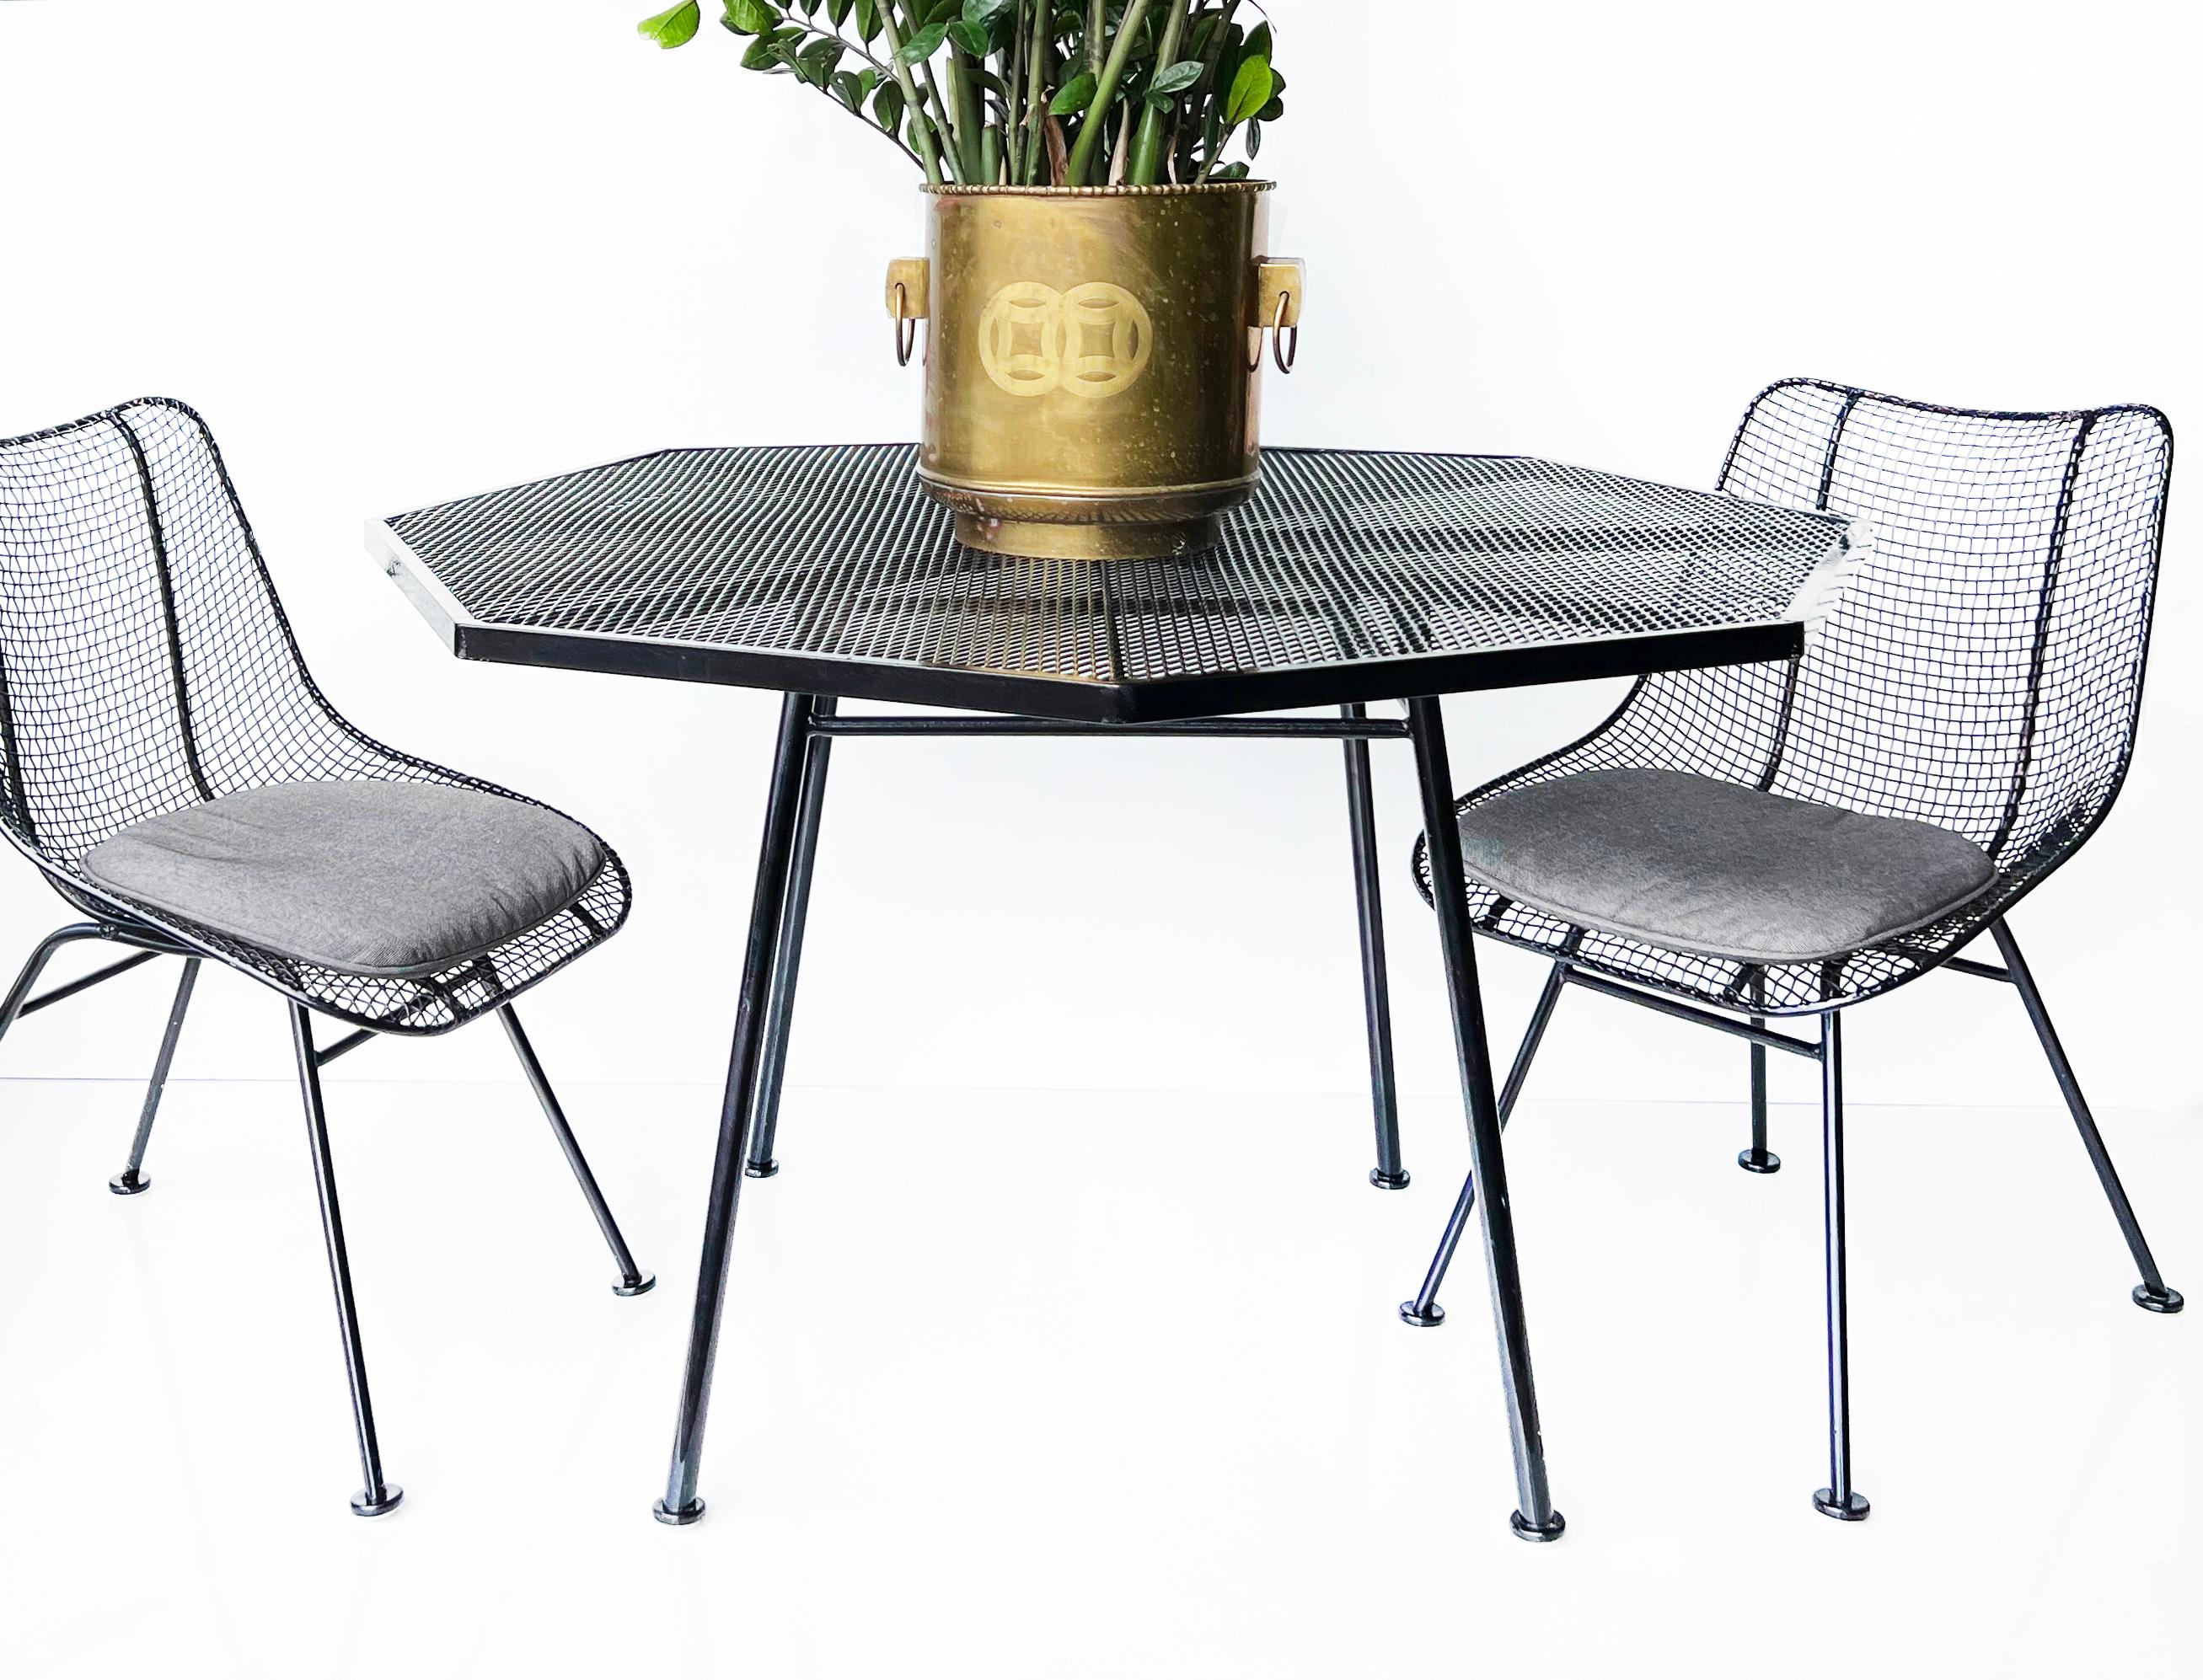 1950s Russell Woodard Black Sculptura Dining Side Chairs Set, 7  Available Per Item

Offered for sale is a set of 1950s Mid-century Modern Russell Woodard Black Sculptura dining chairs that can be used either indoors or outdoors. Chairs are